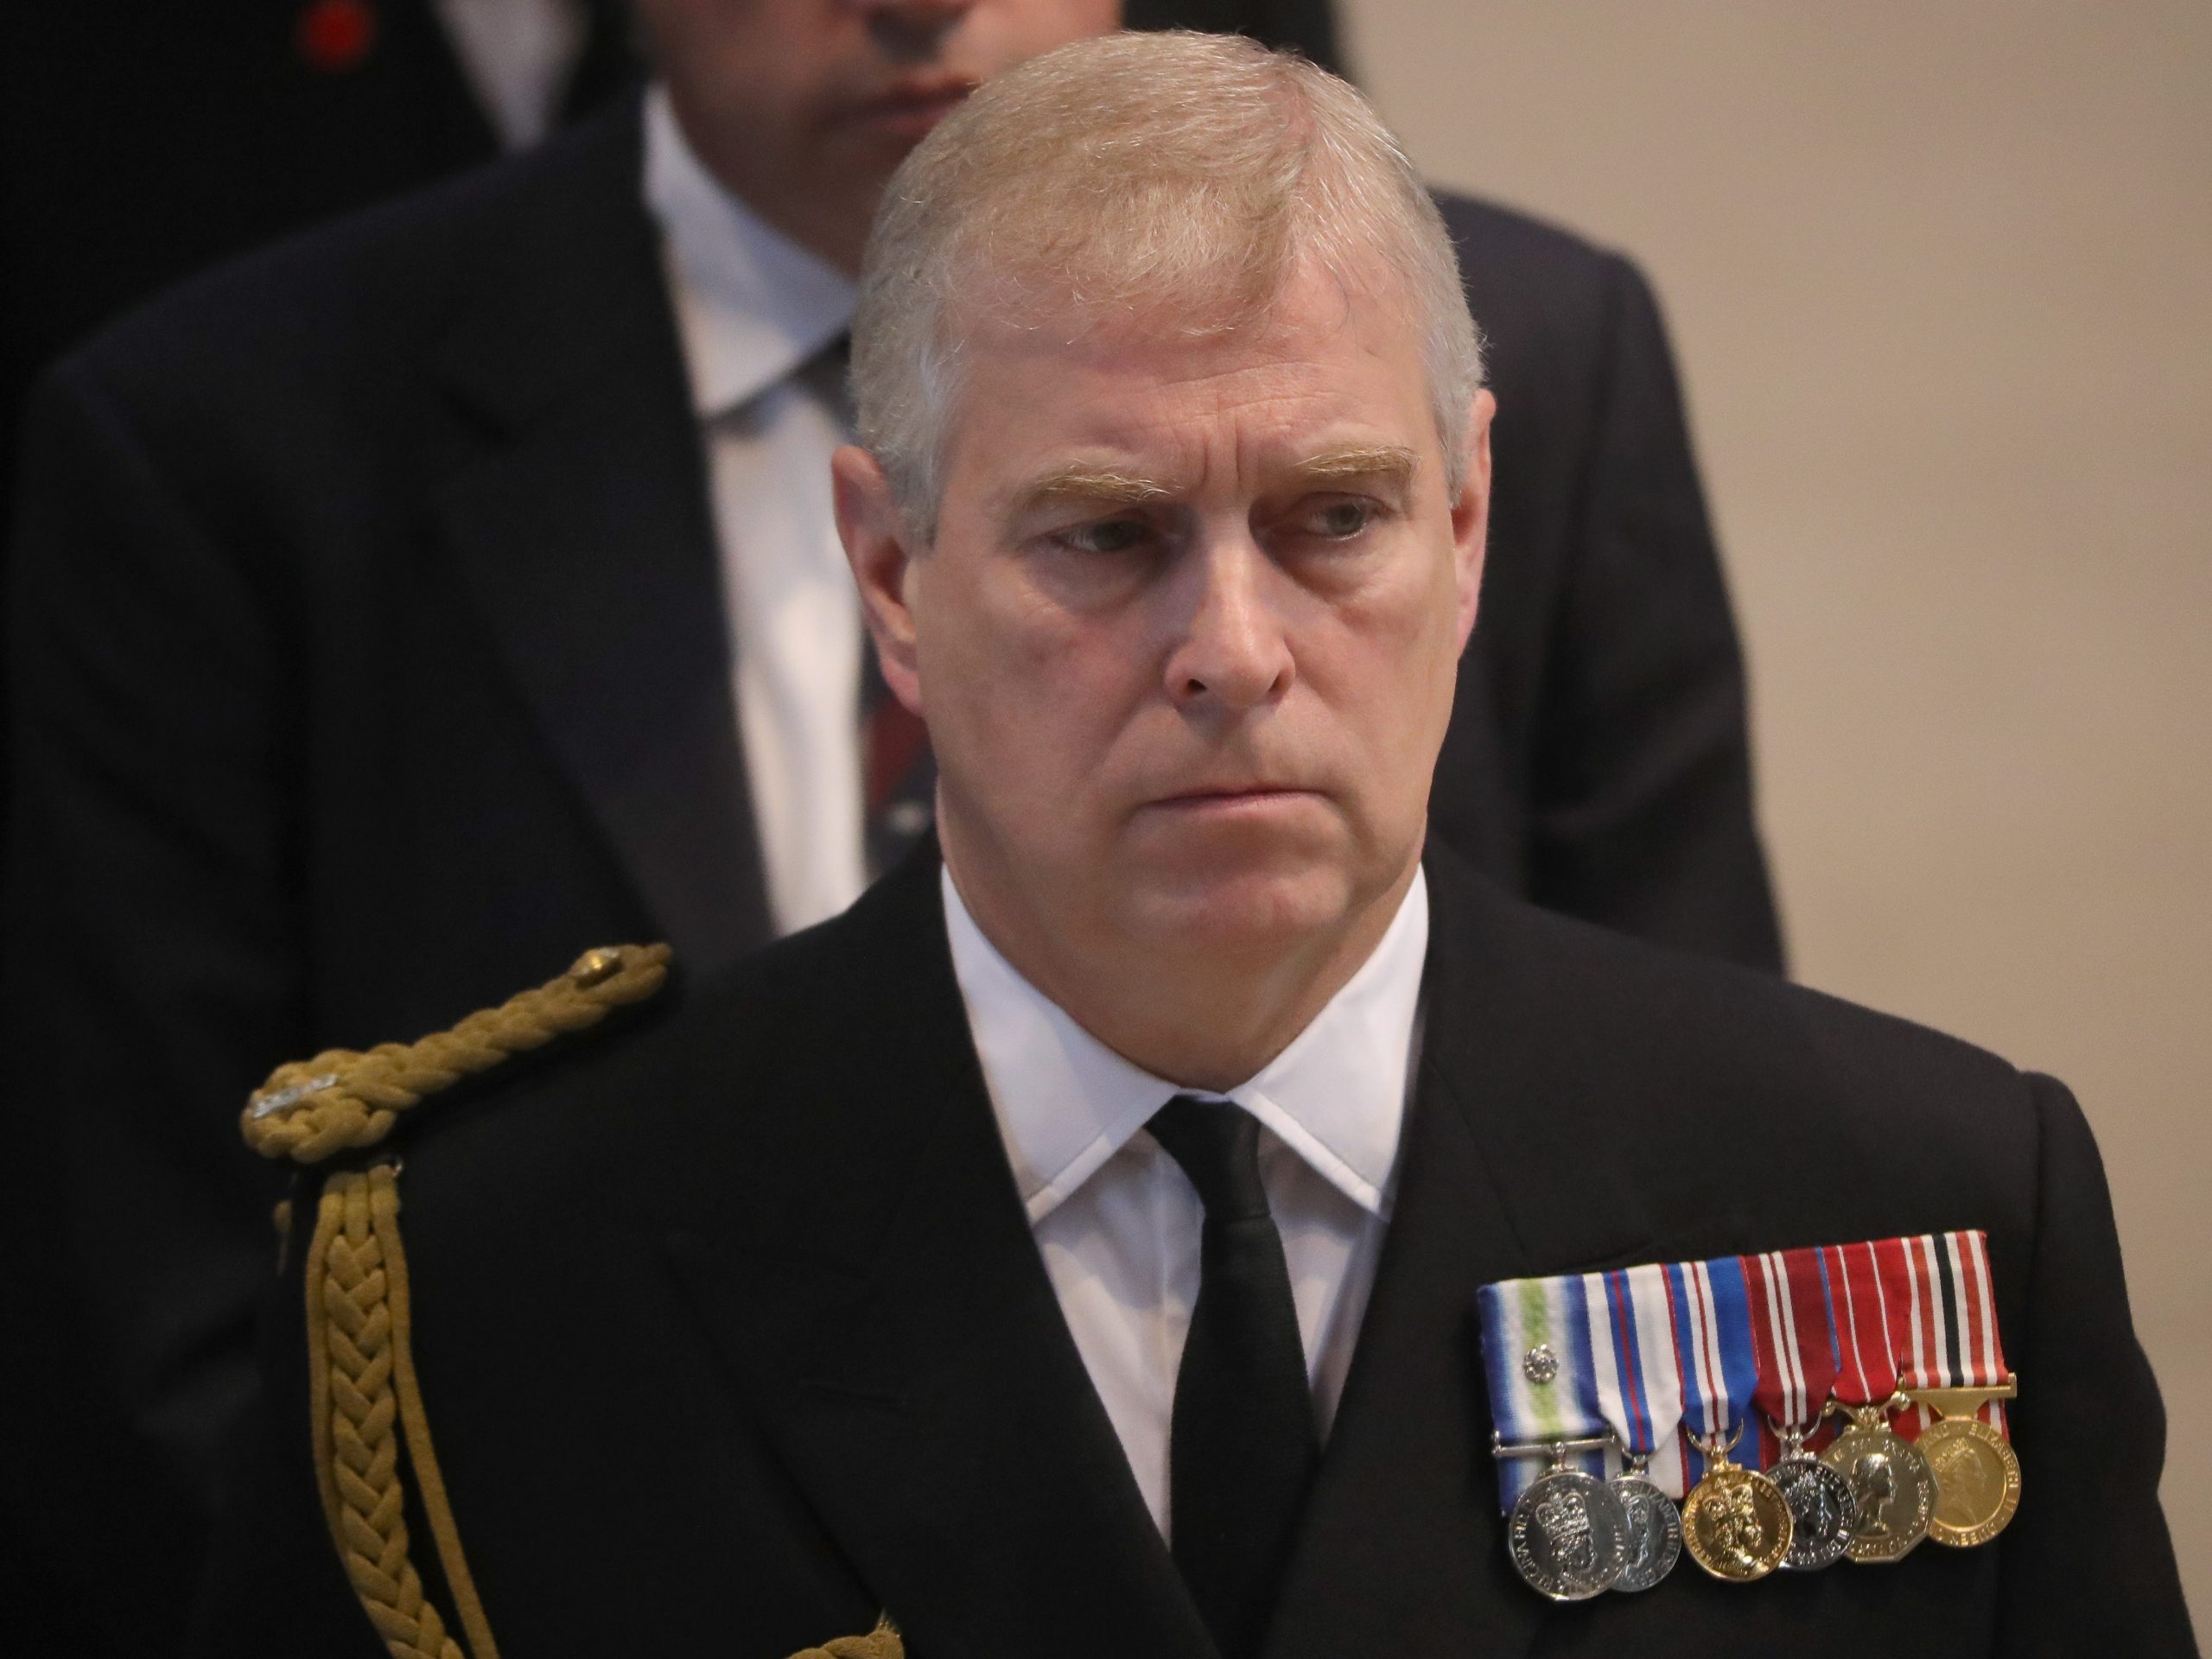 Prince Andrew, Duke of York, attends a commemoration marking the 100th anniversary since the start of the Battle of the Somme.